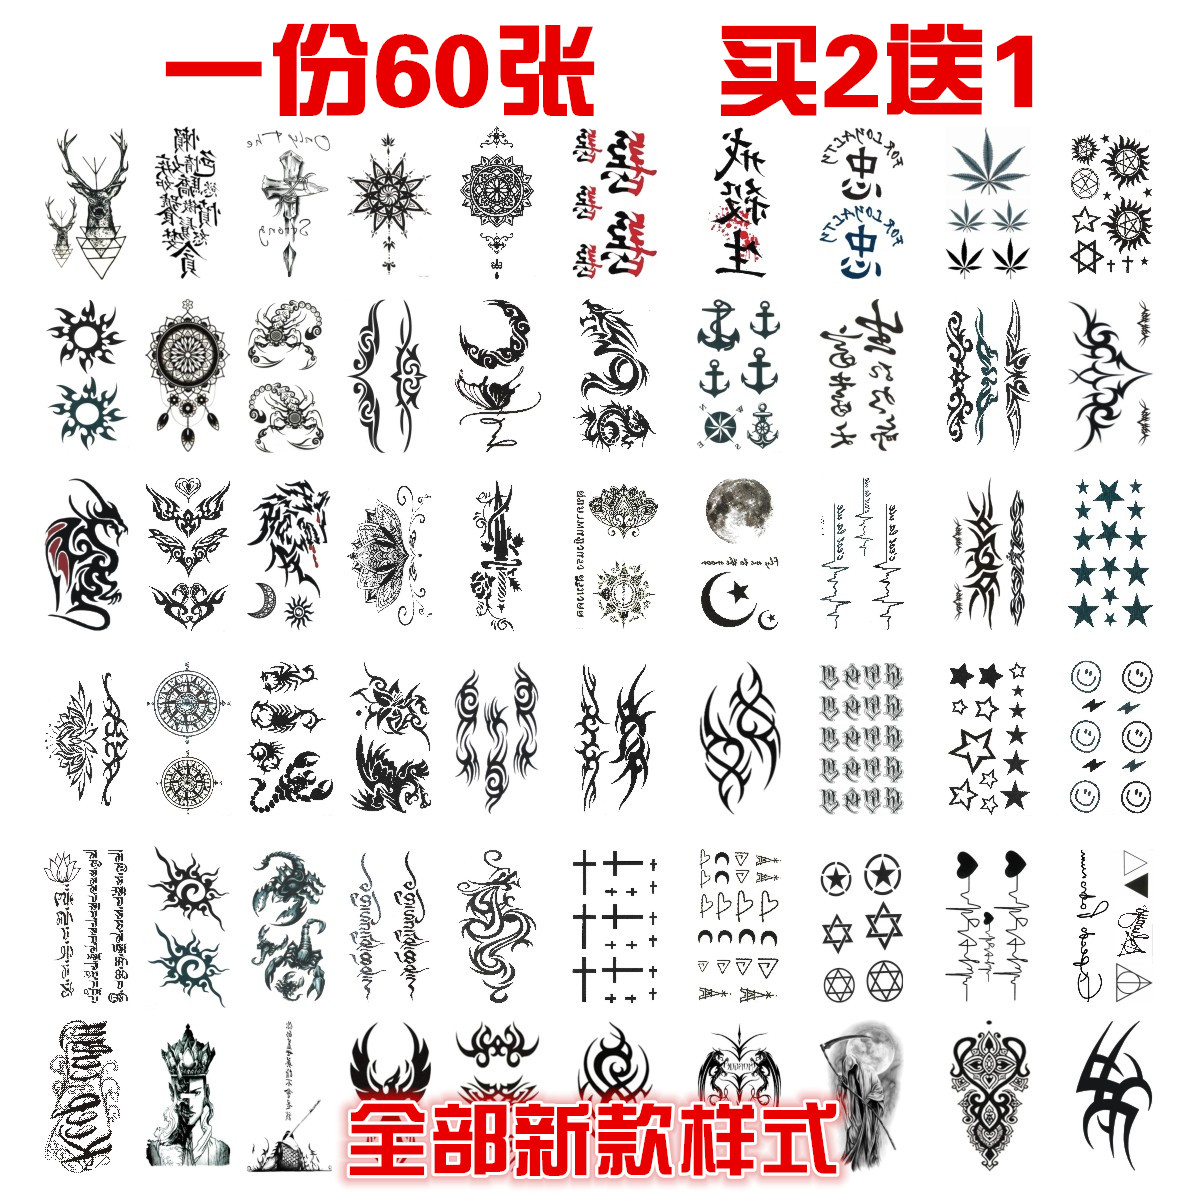 60 Tattoo Stickers Waterproof Woman Durable Simulation Arm, ankle, Male Personality Totem Small Patterns Tattoo Sticker Darkness